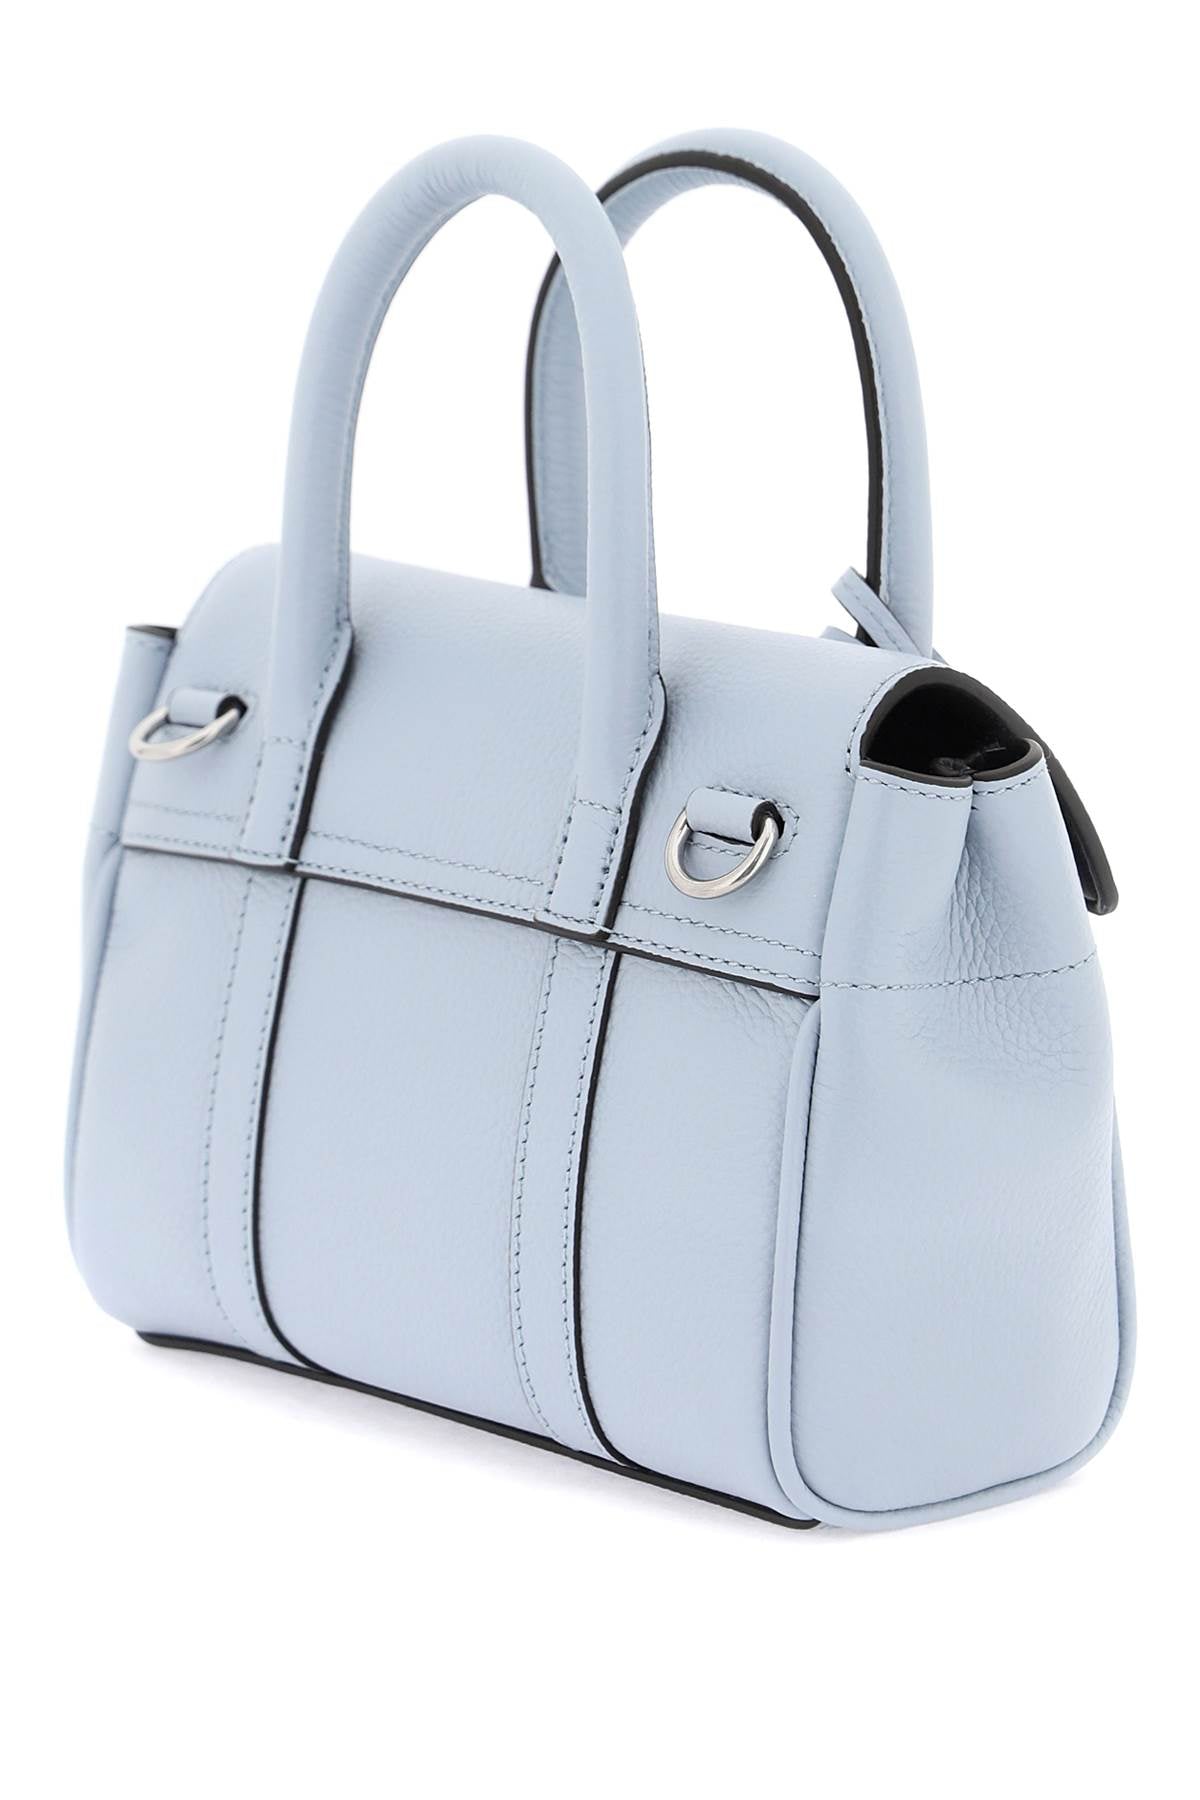 MULBERRY Mini Bayswater Iconic Light Blue Leather Handbag with Adjustable Strap and Postman's Lock